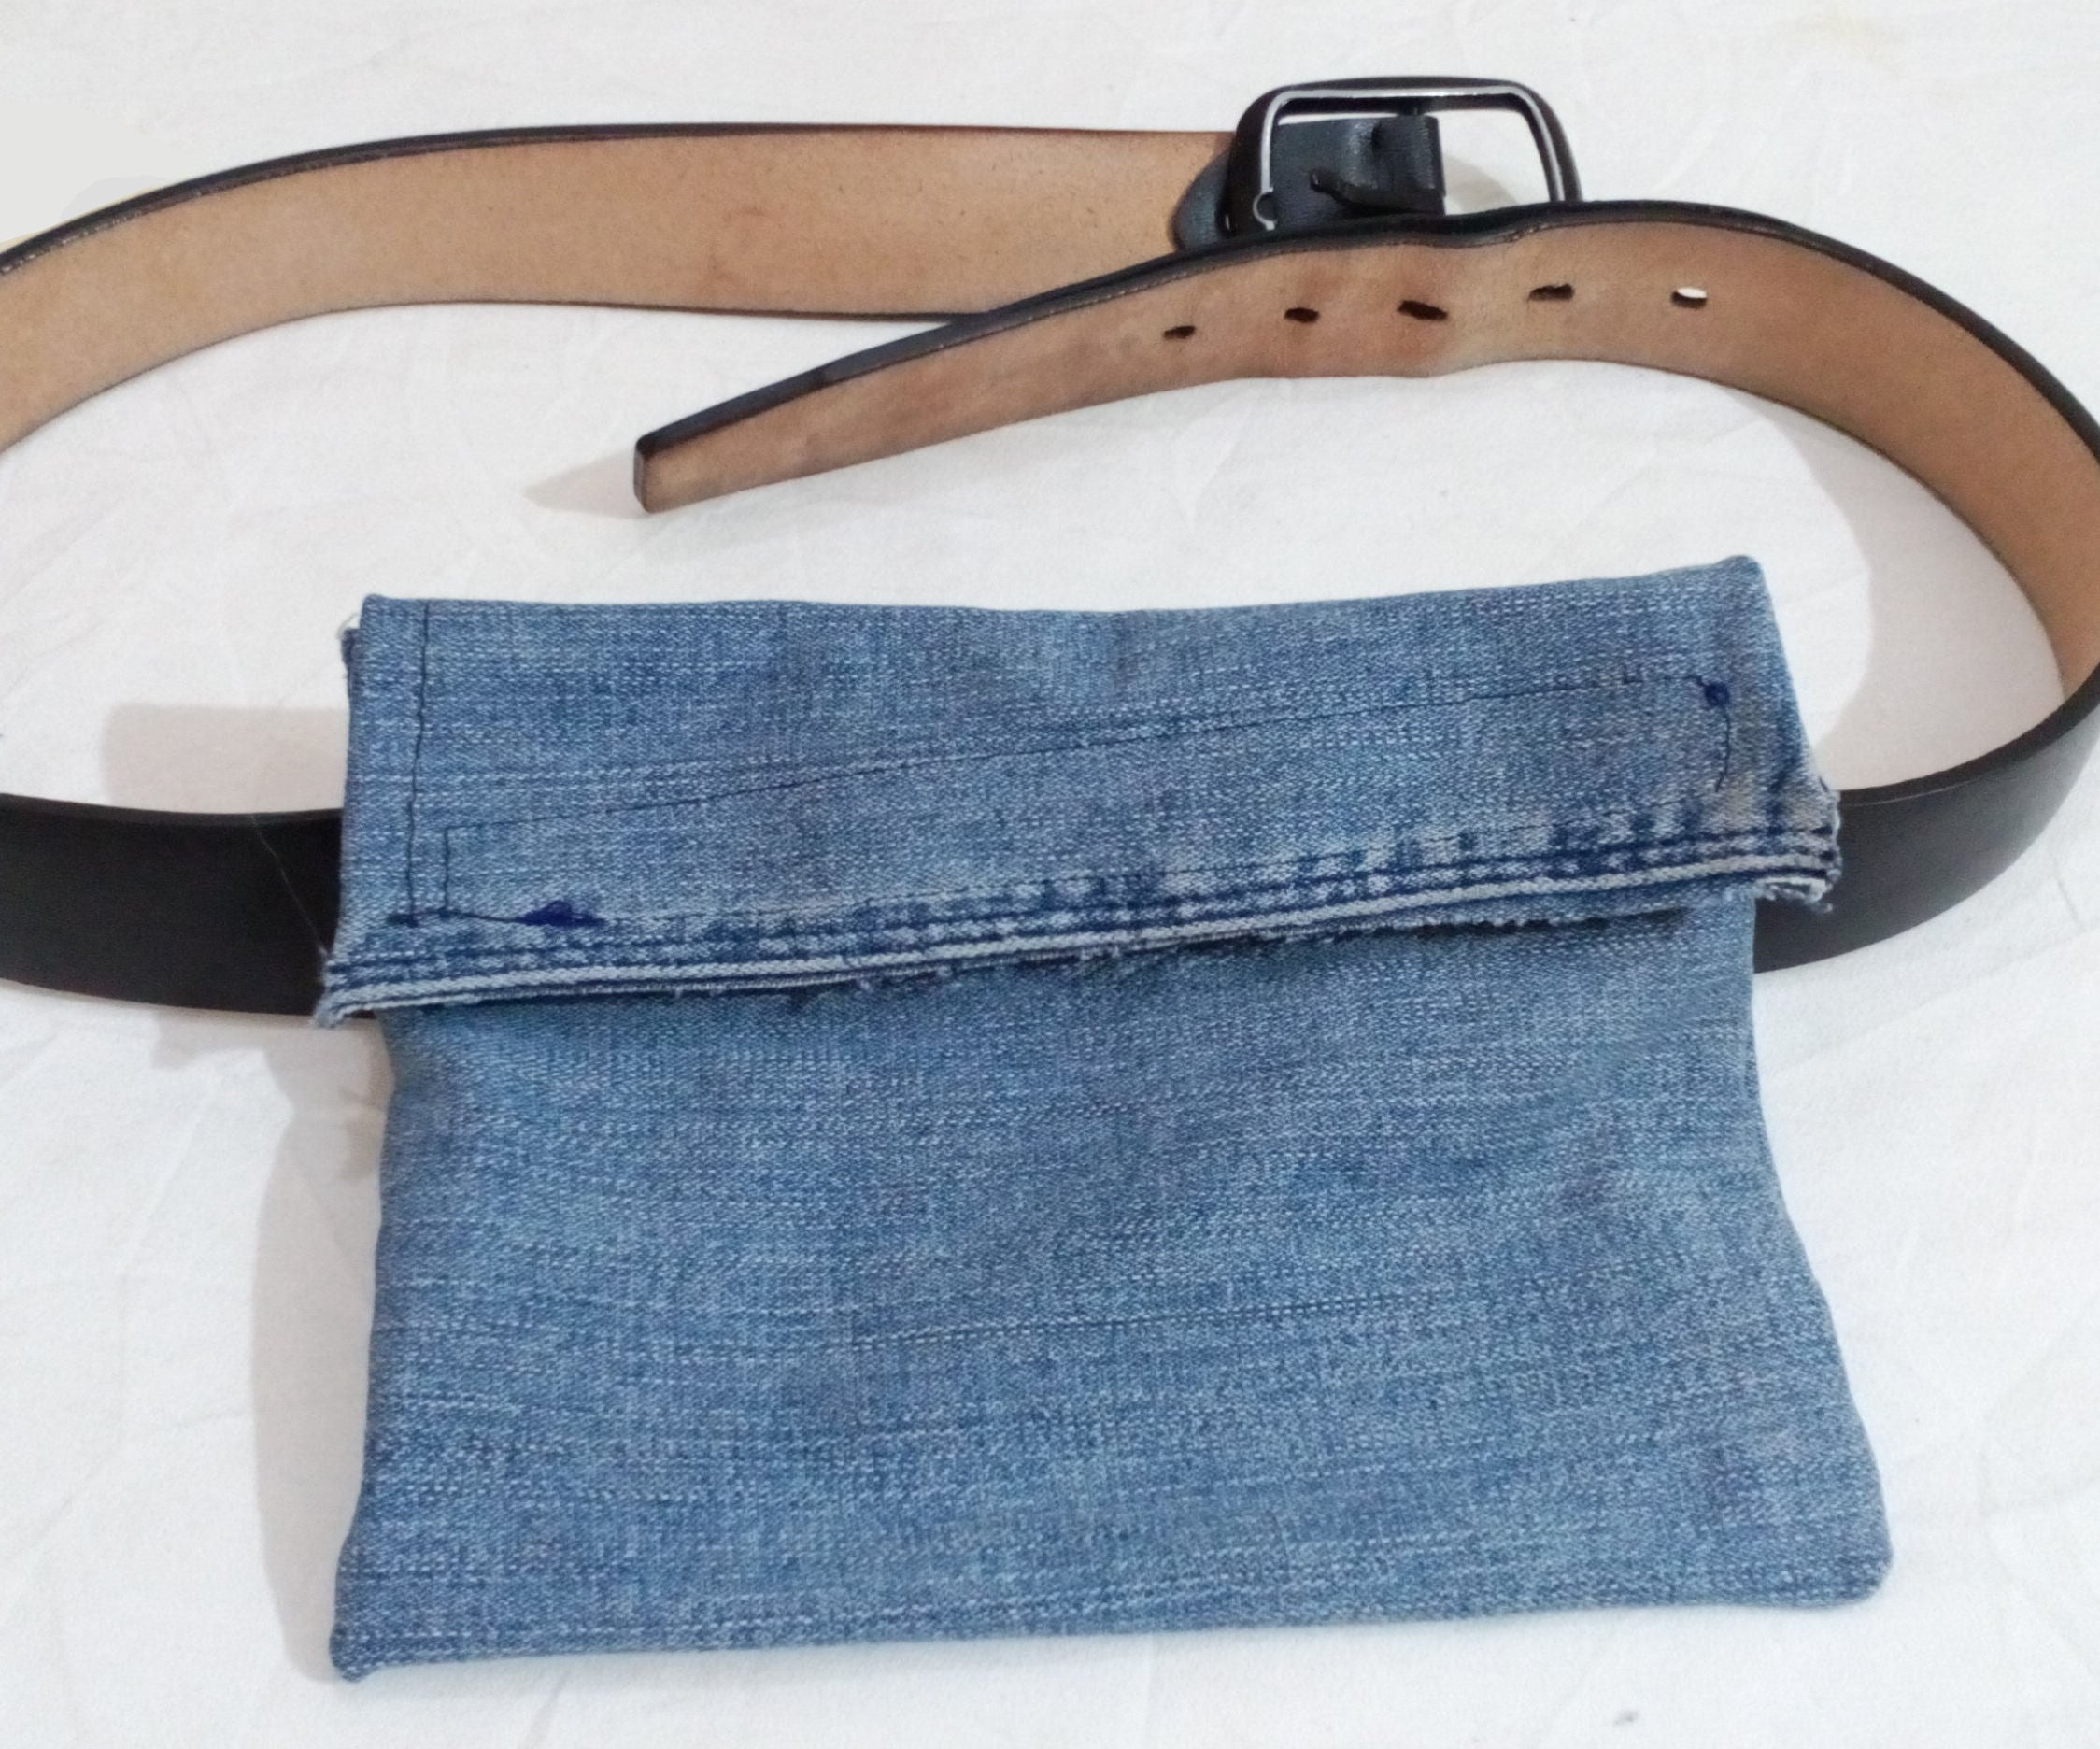 How to Make Fanny Pack ,Stationery Bag From Old Jeans